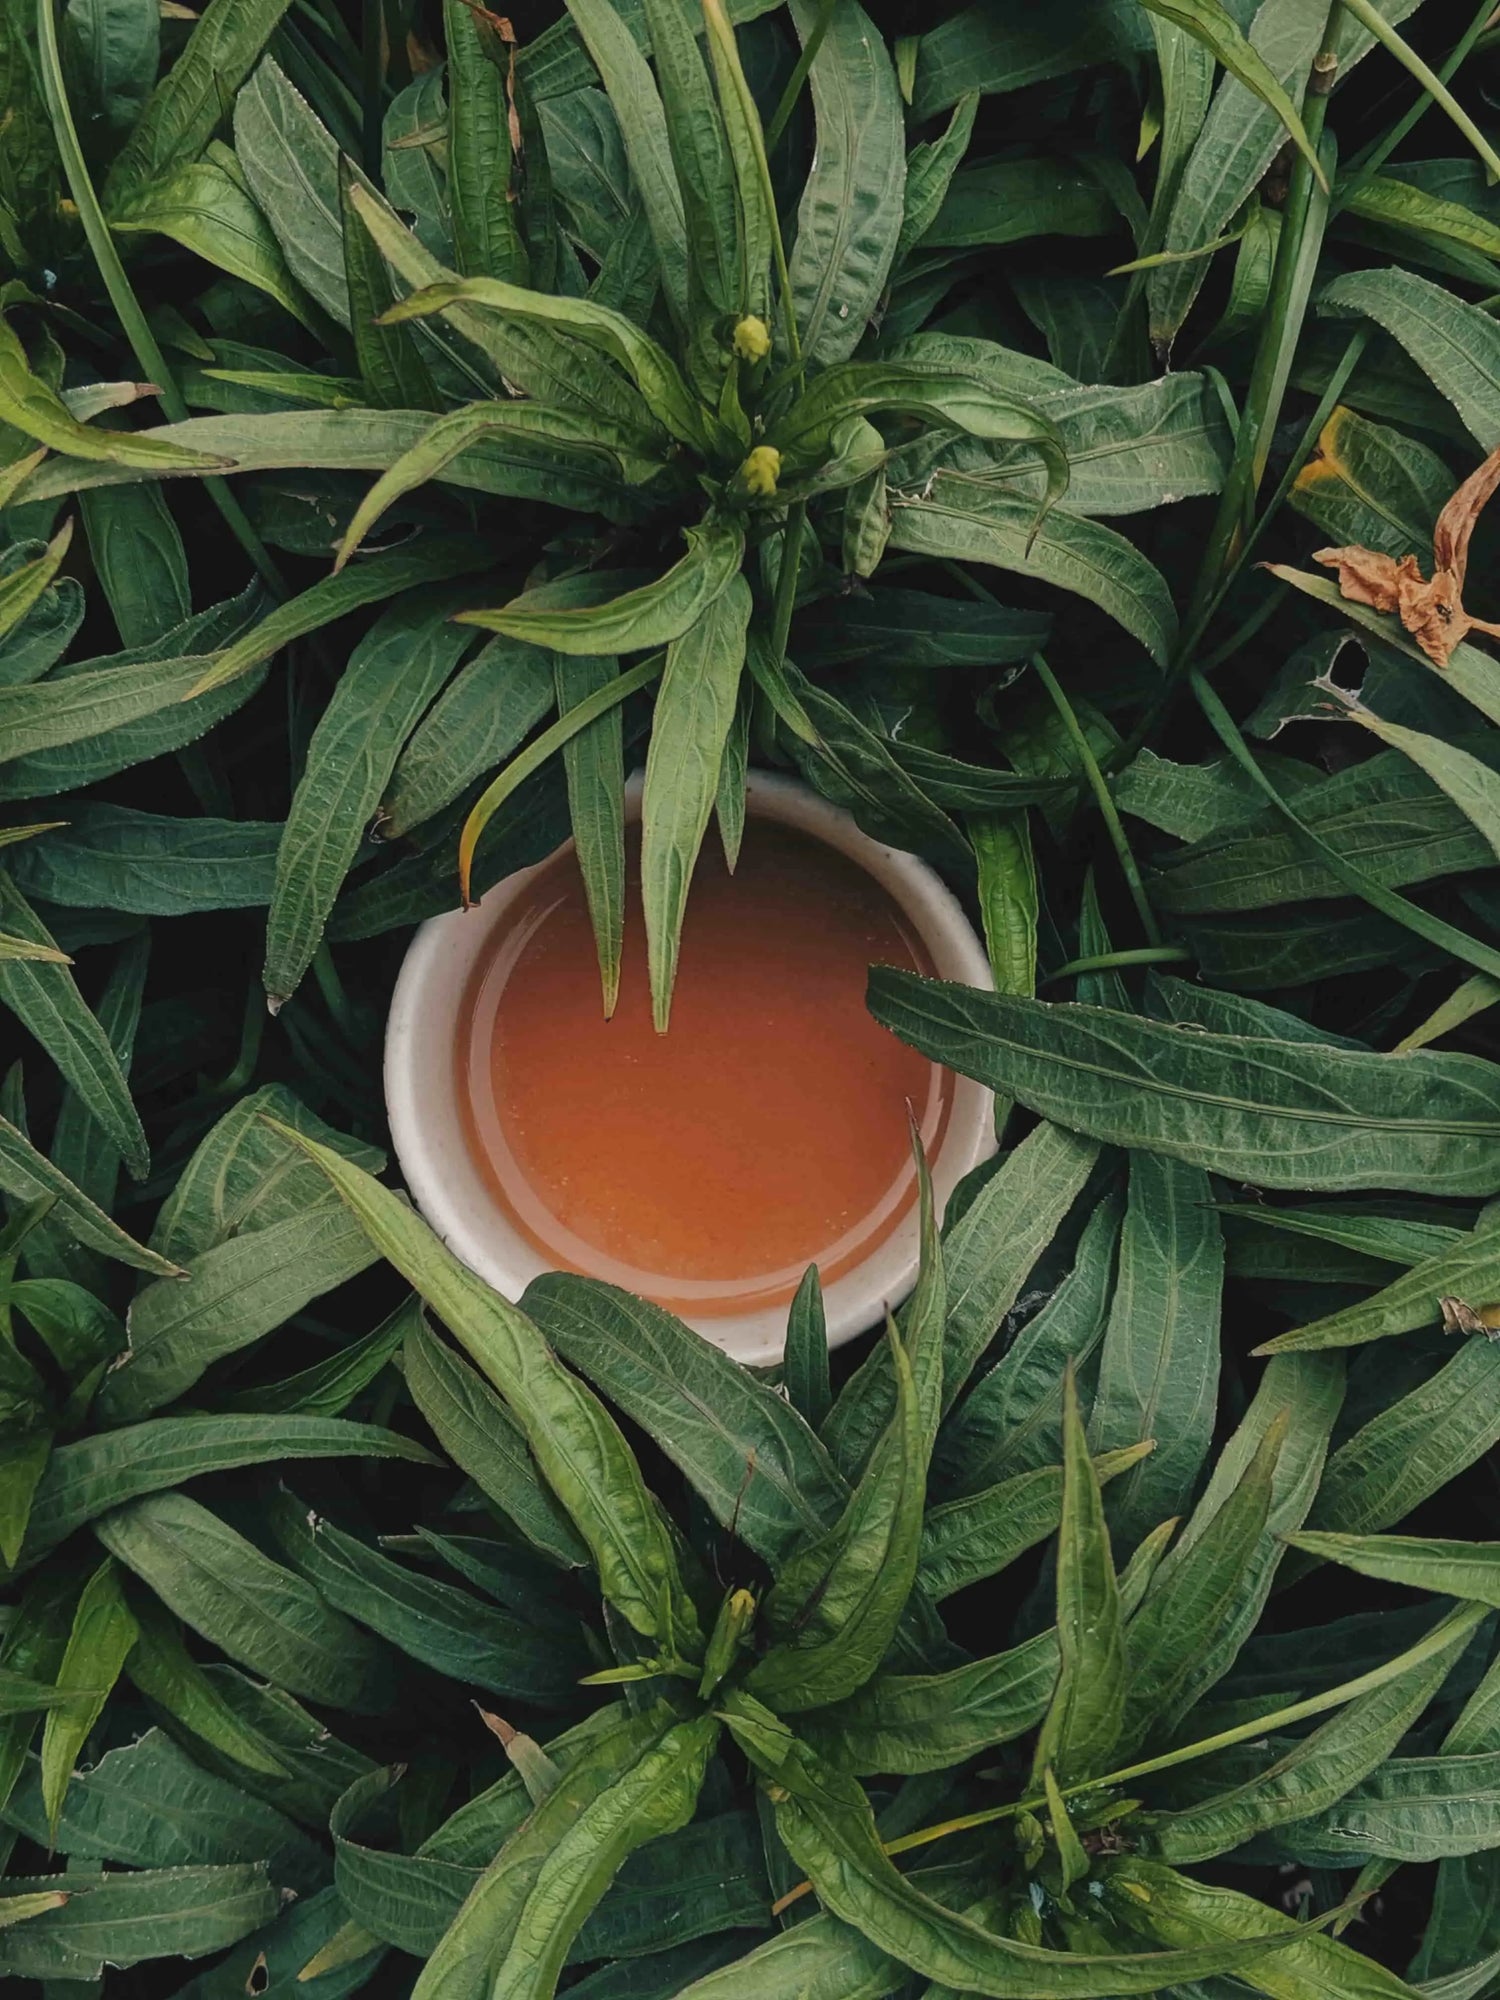 Our favorite weird and wonderful tea facts - 3 BRU AG